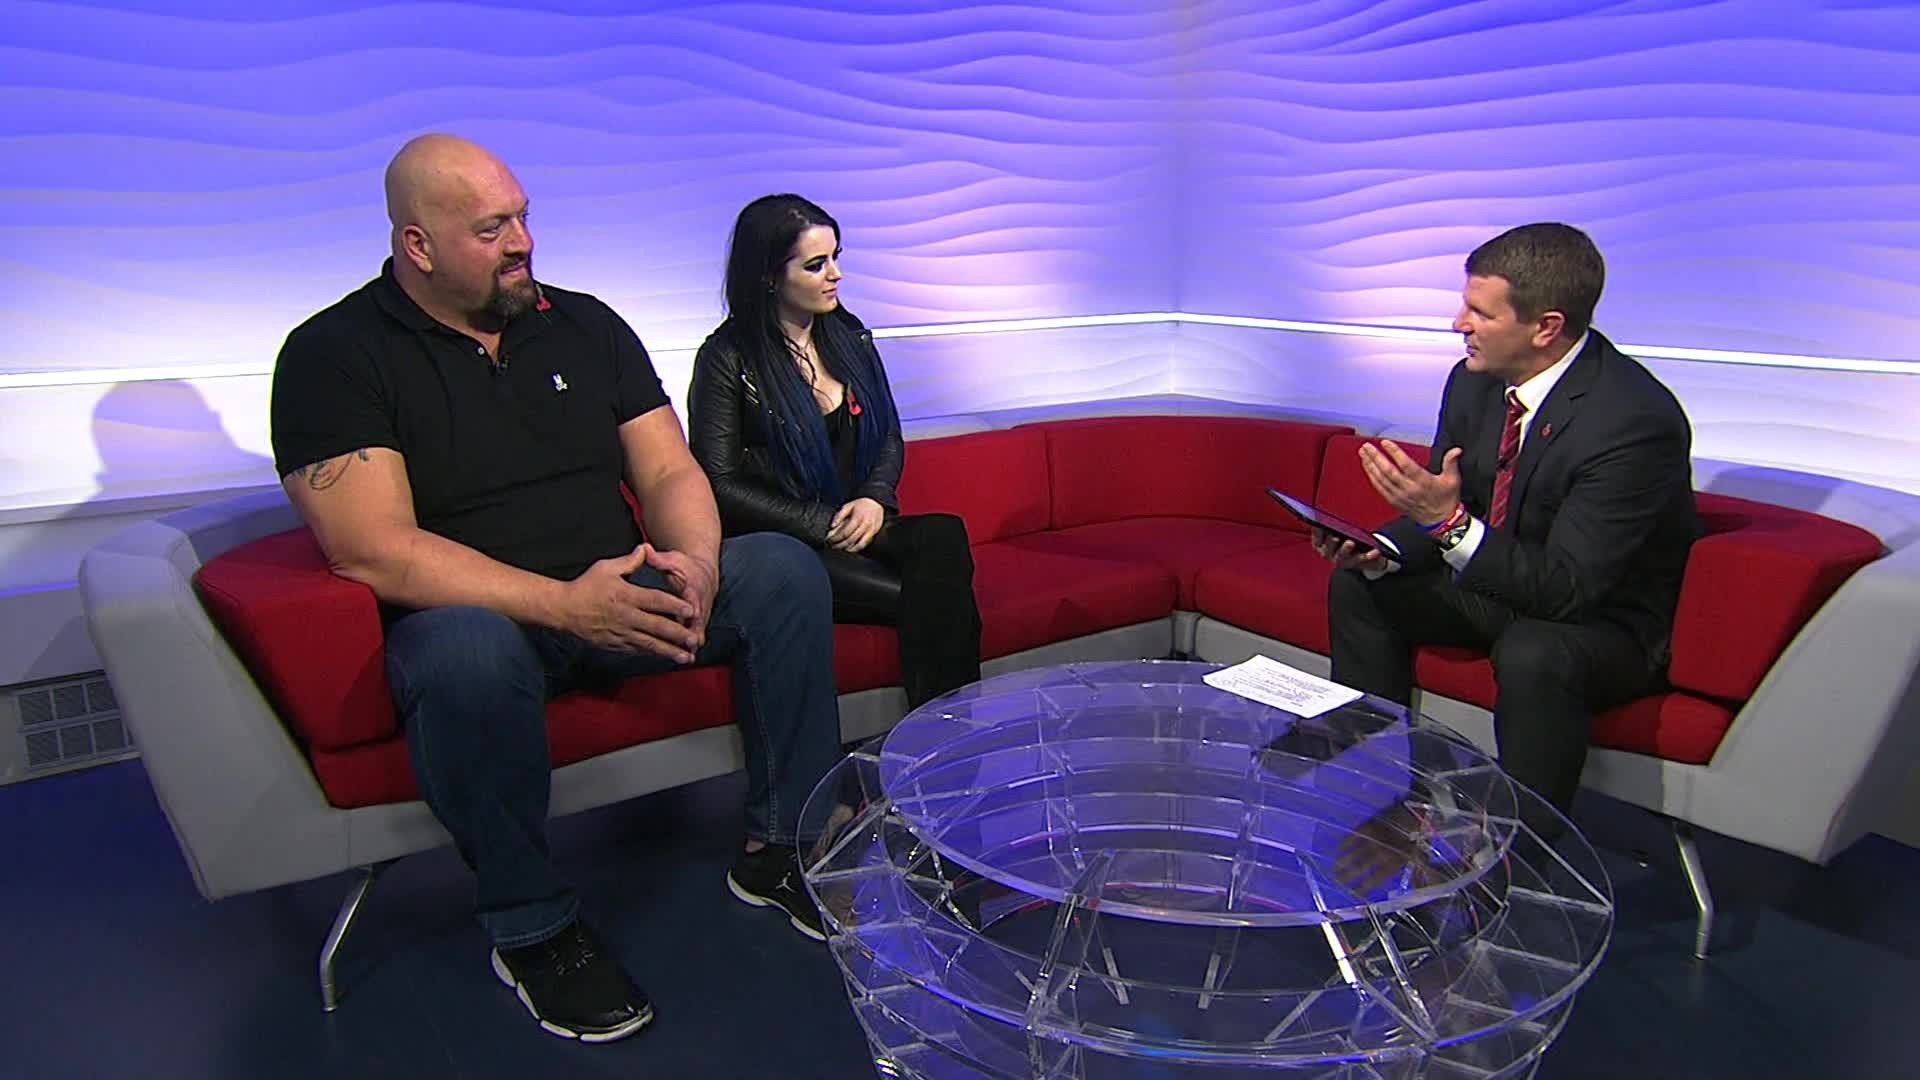 1920x1080 WWE stars Big Show and Paige joined us on Sky Sports News HQ